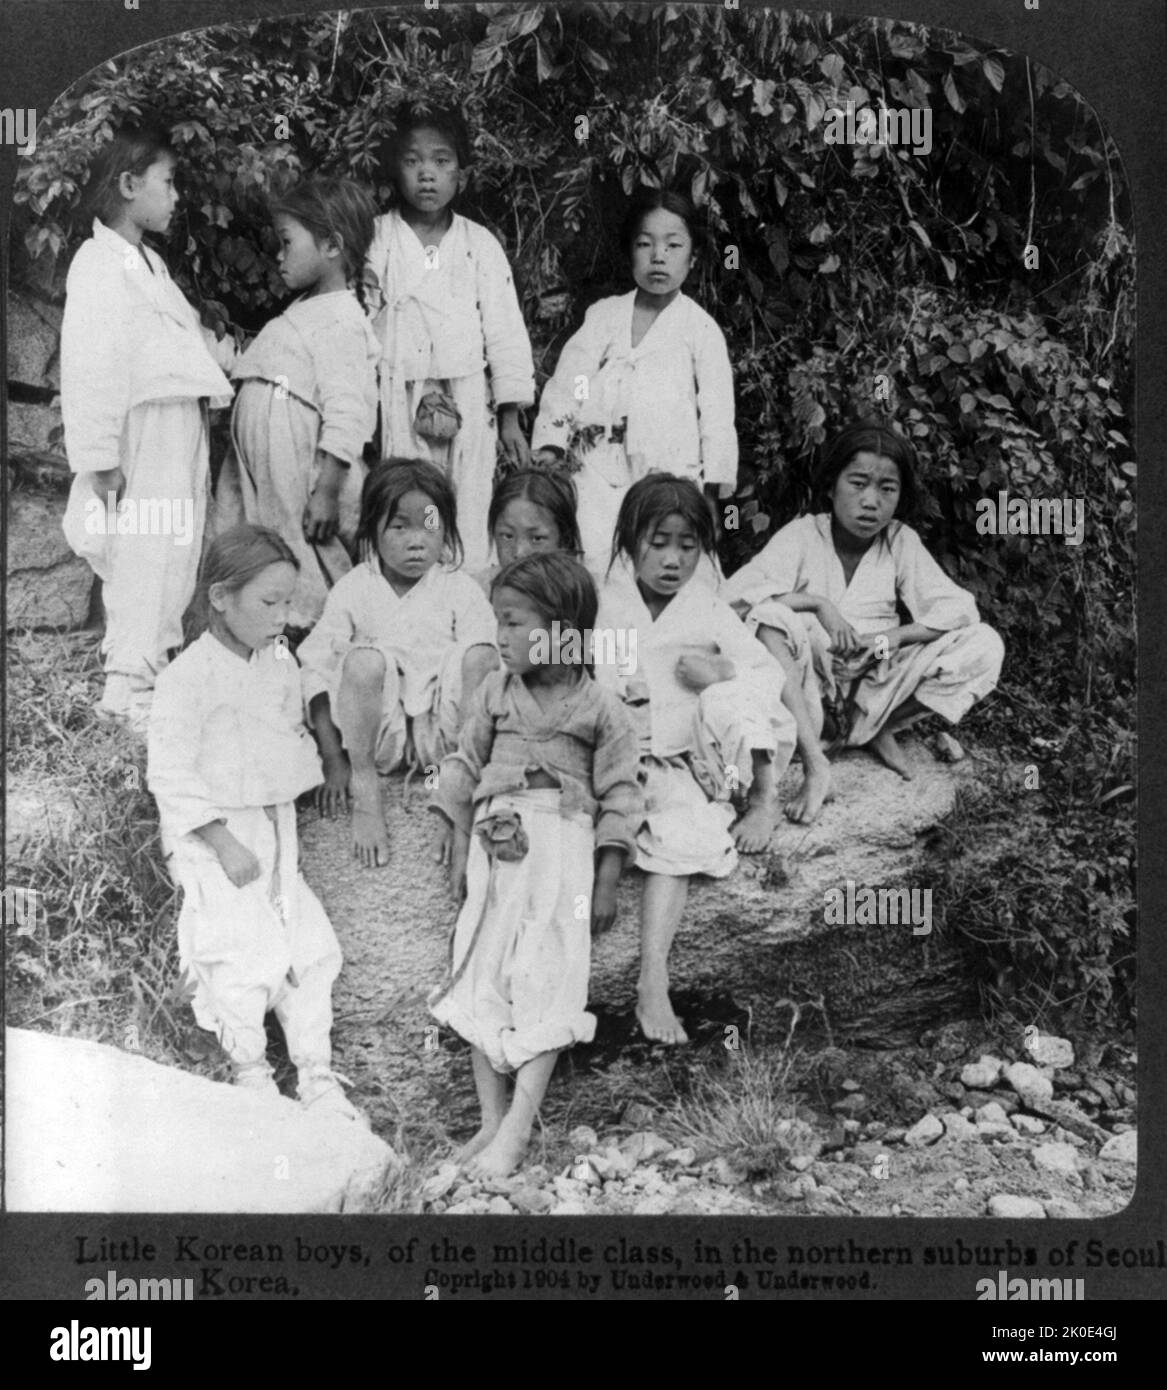 Photograph showing Joseon era children from a poor rural area wearing torn clothes. Korea, 1900. Stock Photo